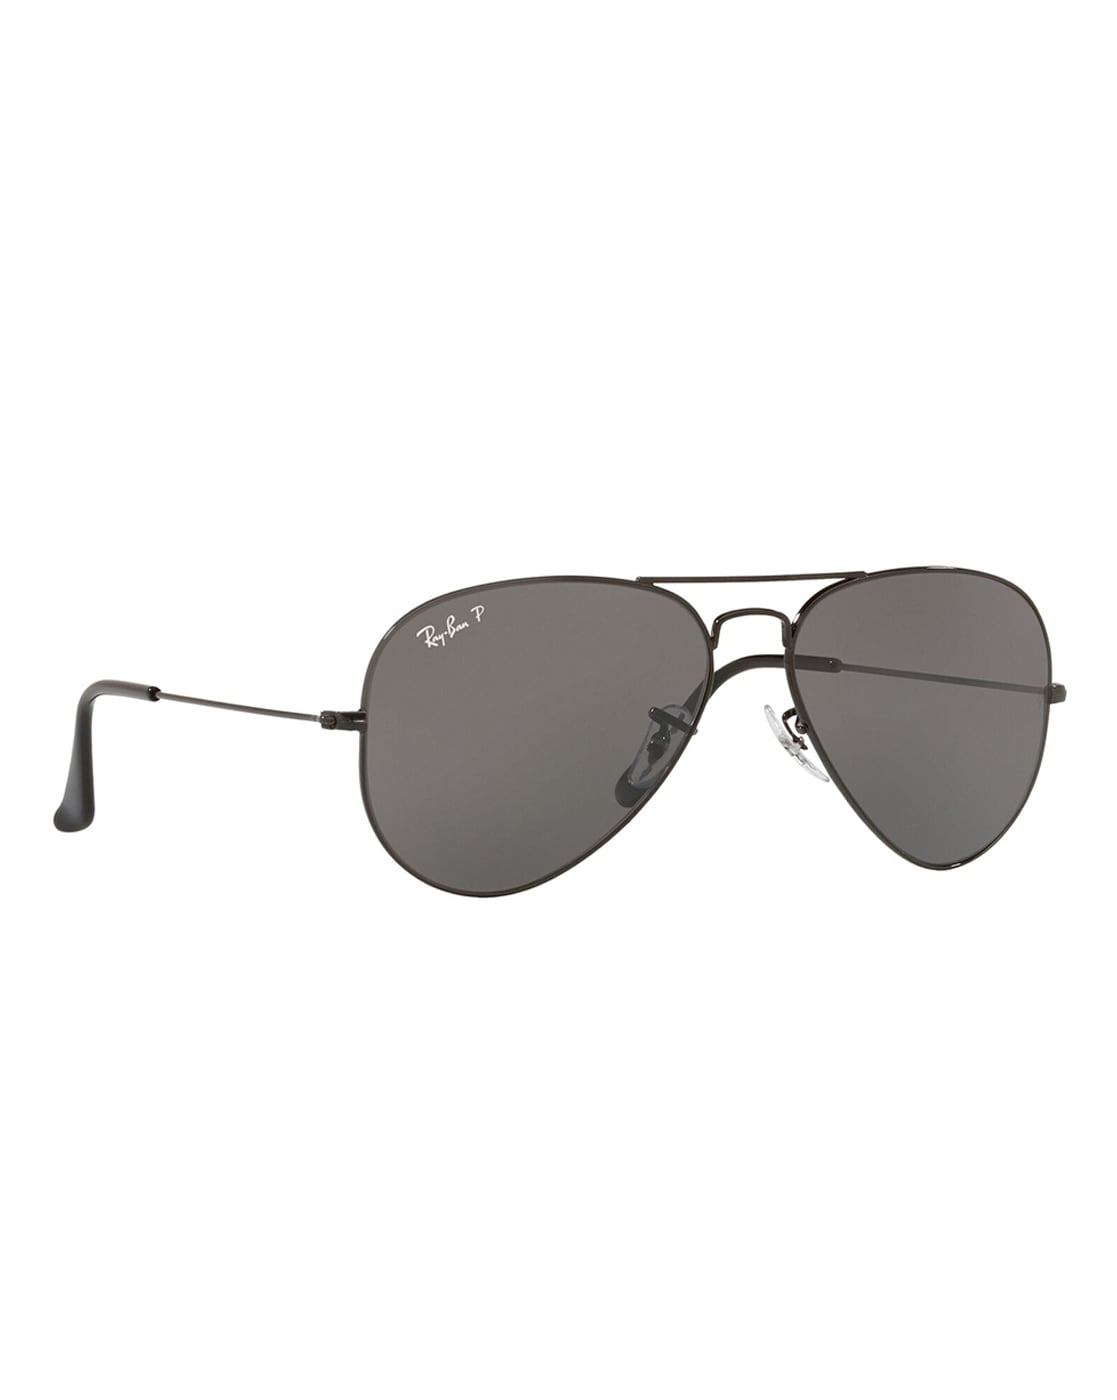 Ray-Ban Aviator RB3025 Gray-Gradient 55 Size | RB3025 003/32 | Optic One UAE